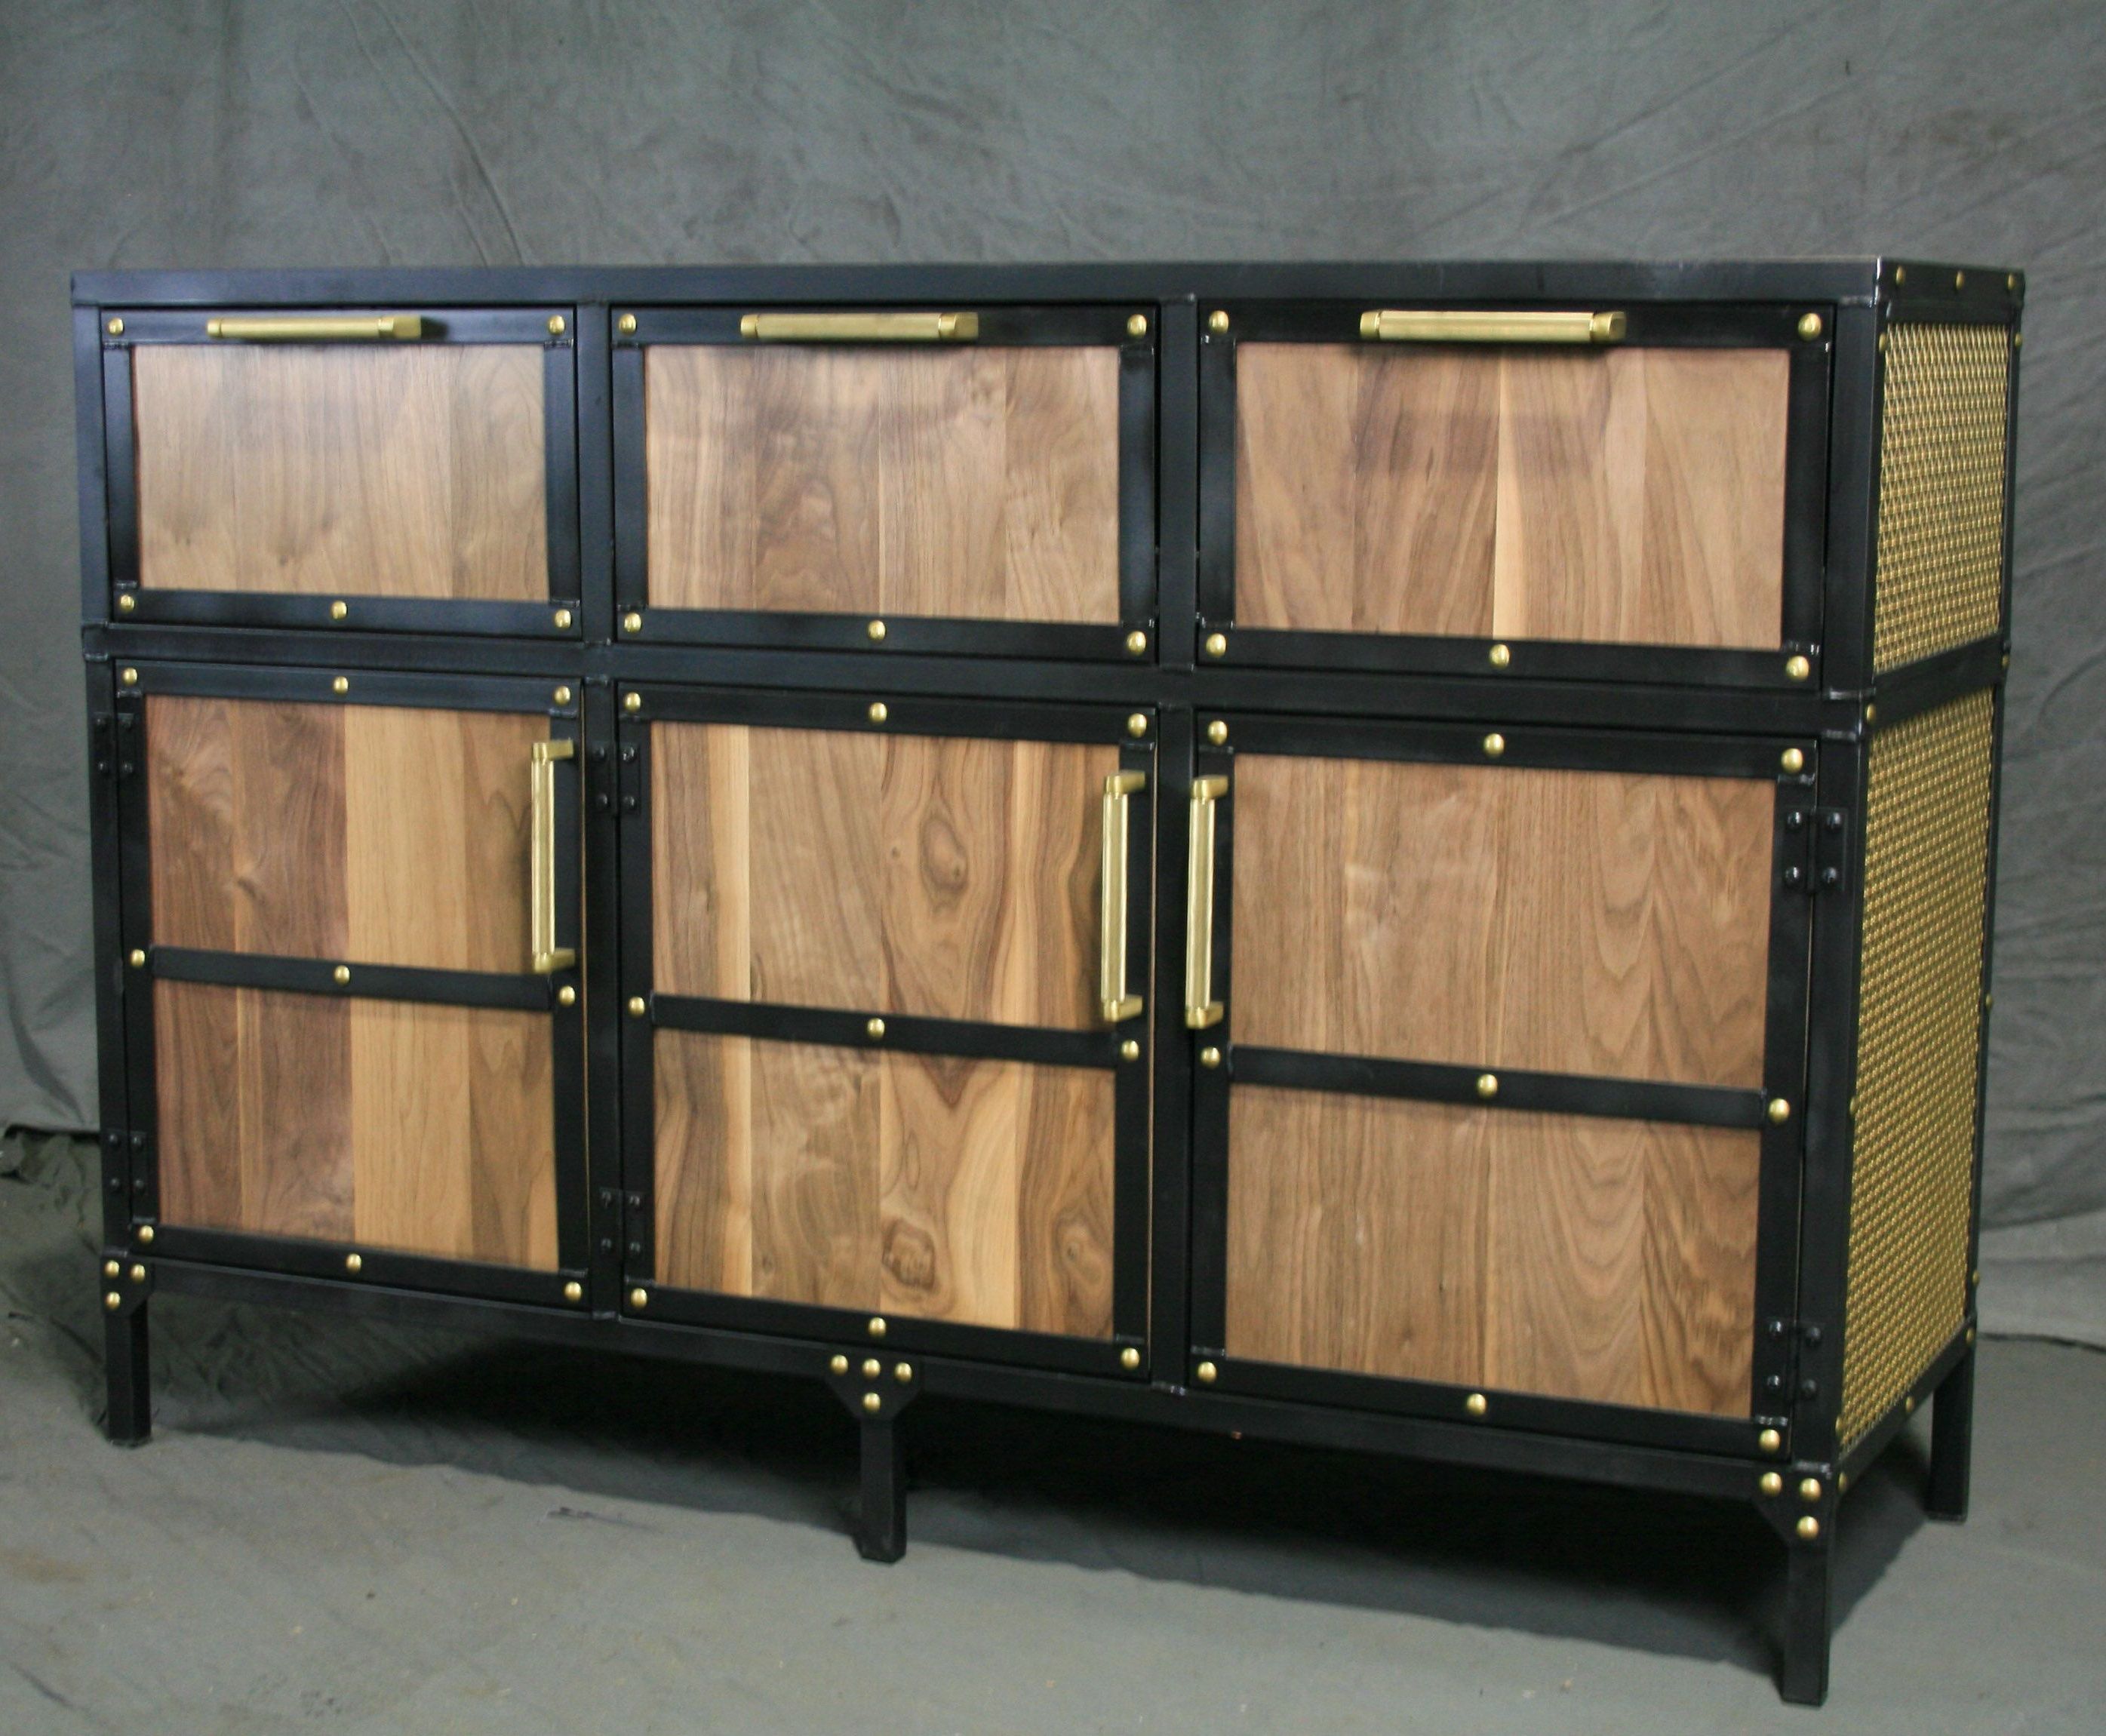 Buy A Handmade Industrial Sideboard With Brass Accents Pertaining To Industrial Concrete Like Buffets (Gallery 14 of 20)